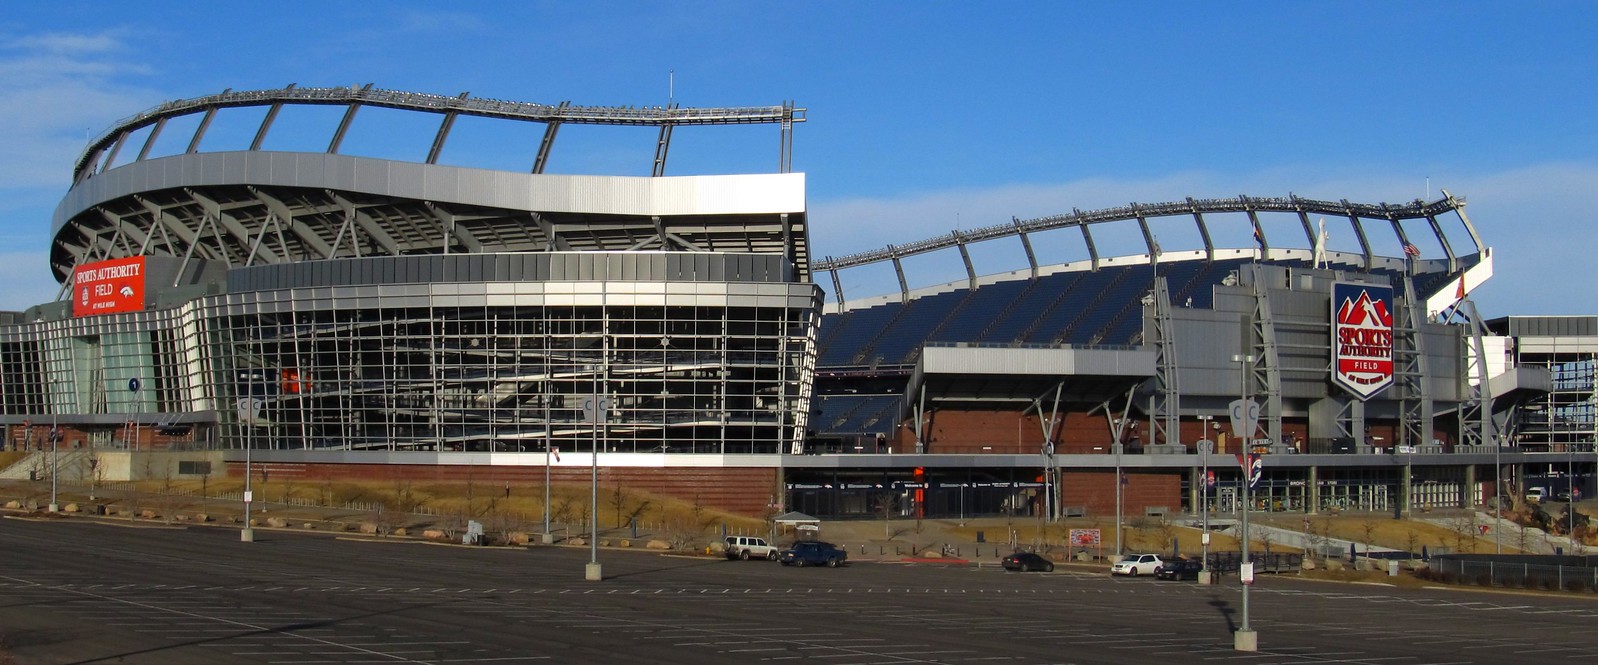 Sports Authority Field at Mile High, Denver, Colorado